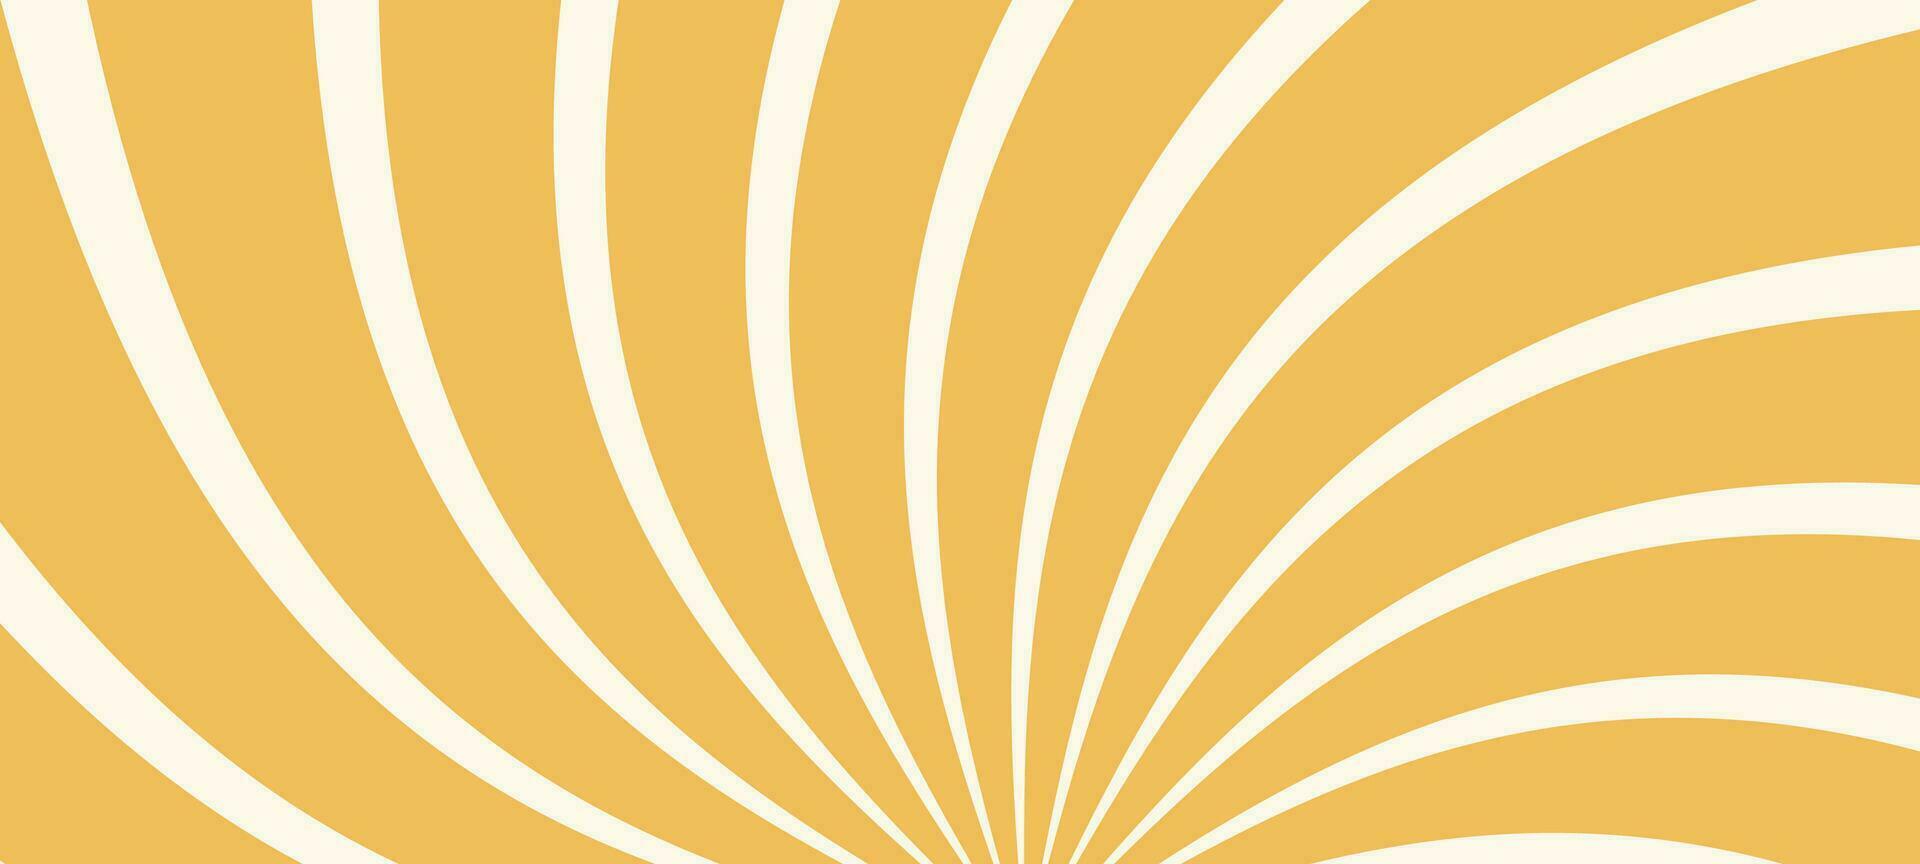 Radial swirl pattern, blending sun, star, and vortex elements. Abstract spiral background in yellow tones with a burst effect. Flat vector illustration isolated